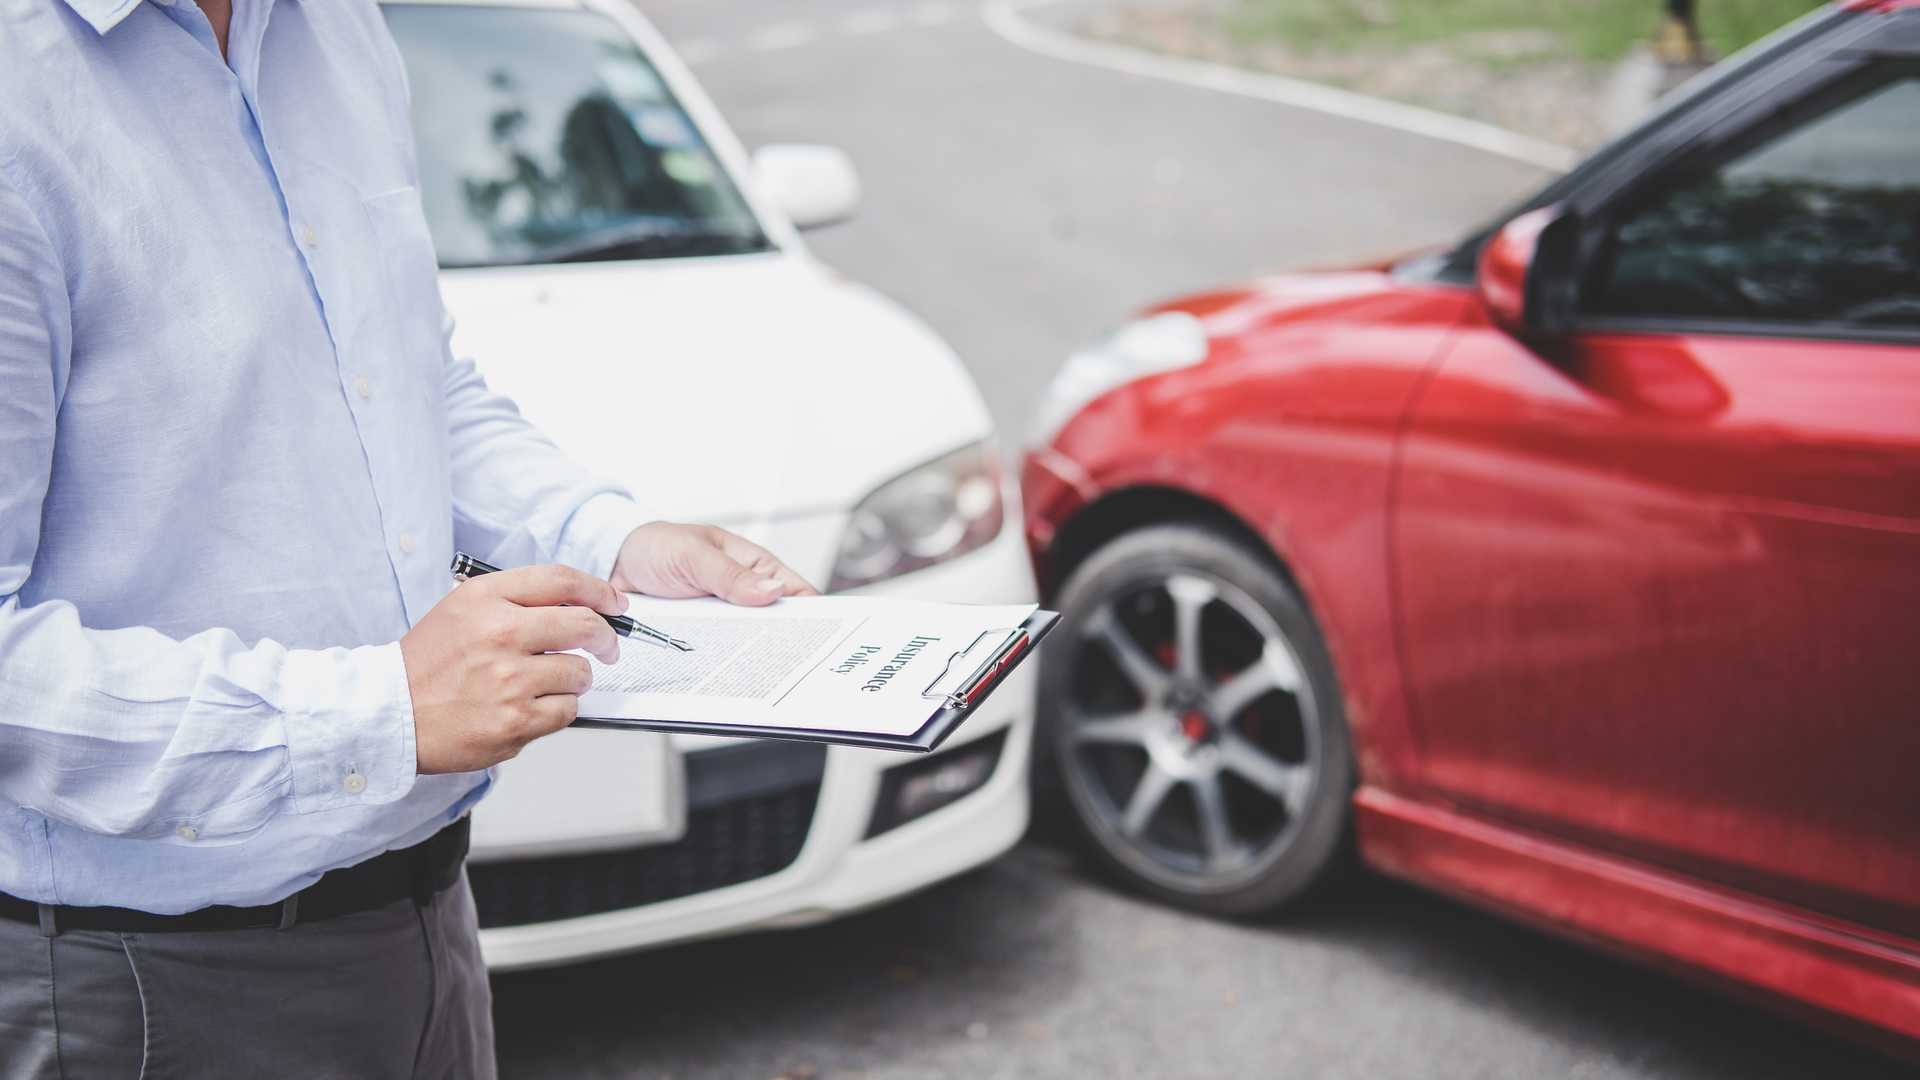 How To Choose Your Car Insurance Deductible